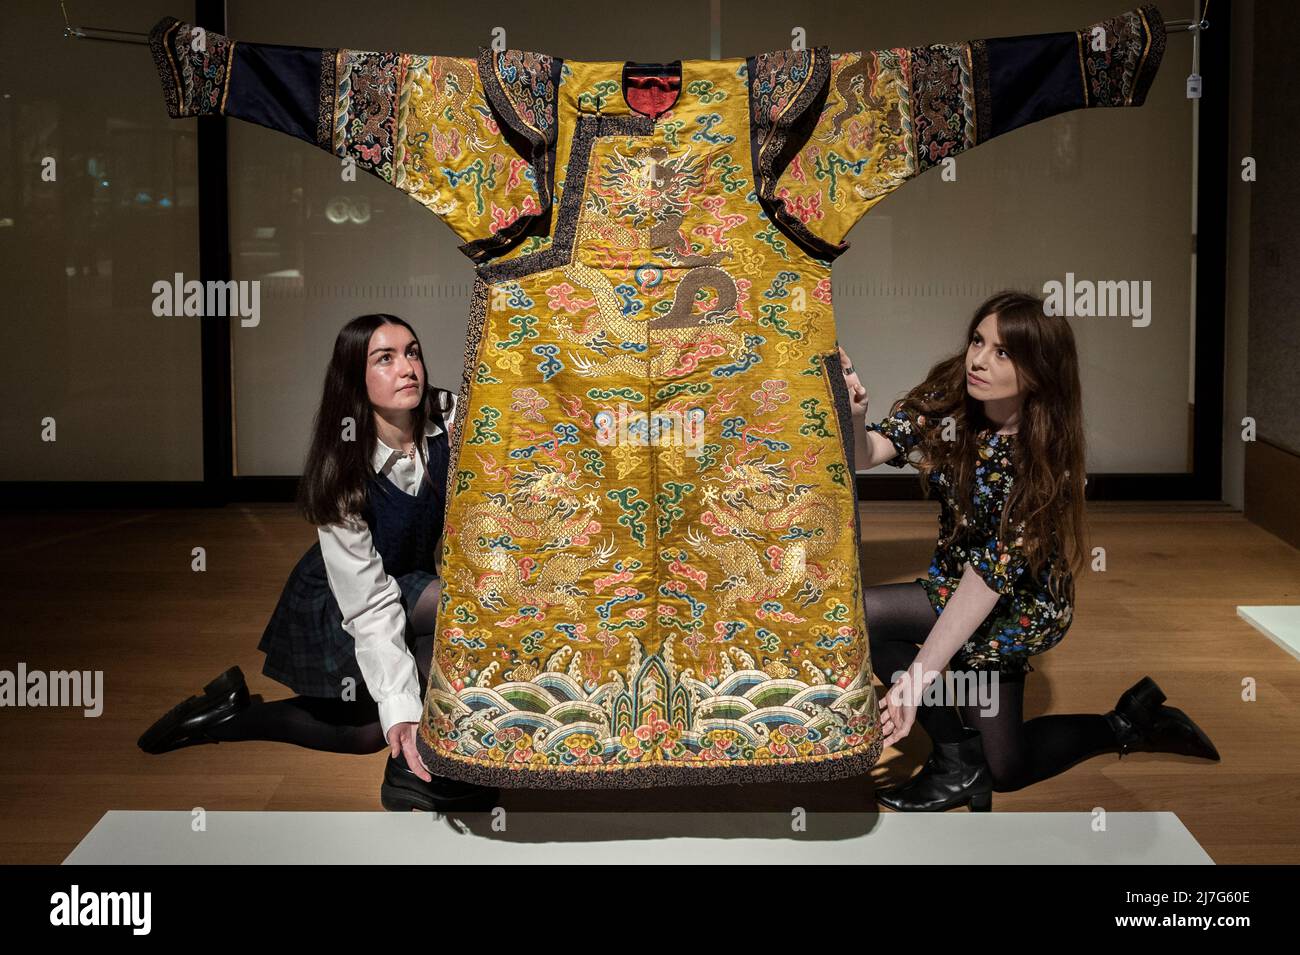 London, UK.  9 May 2022. Staff members poses with “An Exceptionally Rare Yellow-Ground Silk 'Dragon' Noblewoman's Court Robe, Chaopao”, Qianlong,, (Est. £80,000 - £120,000) at a preview of Bonhams’ Fine Chinese Art sale at their New Bond Street gallery.  Chinese jades, ceramics, lacquerware, Imperial and Court textiles and works of art will be offered for sale 12 May.  Credit: Stephen Chung / Alamy Live News Stock Photo